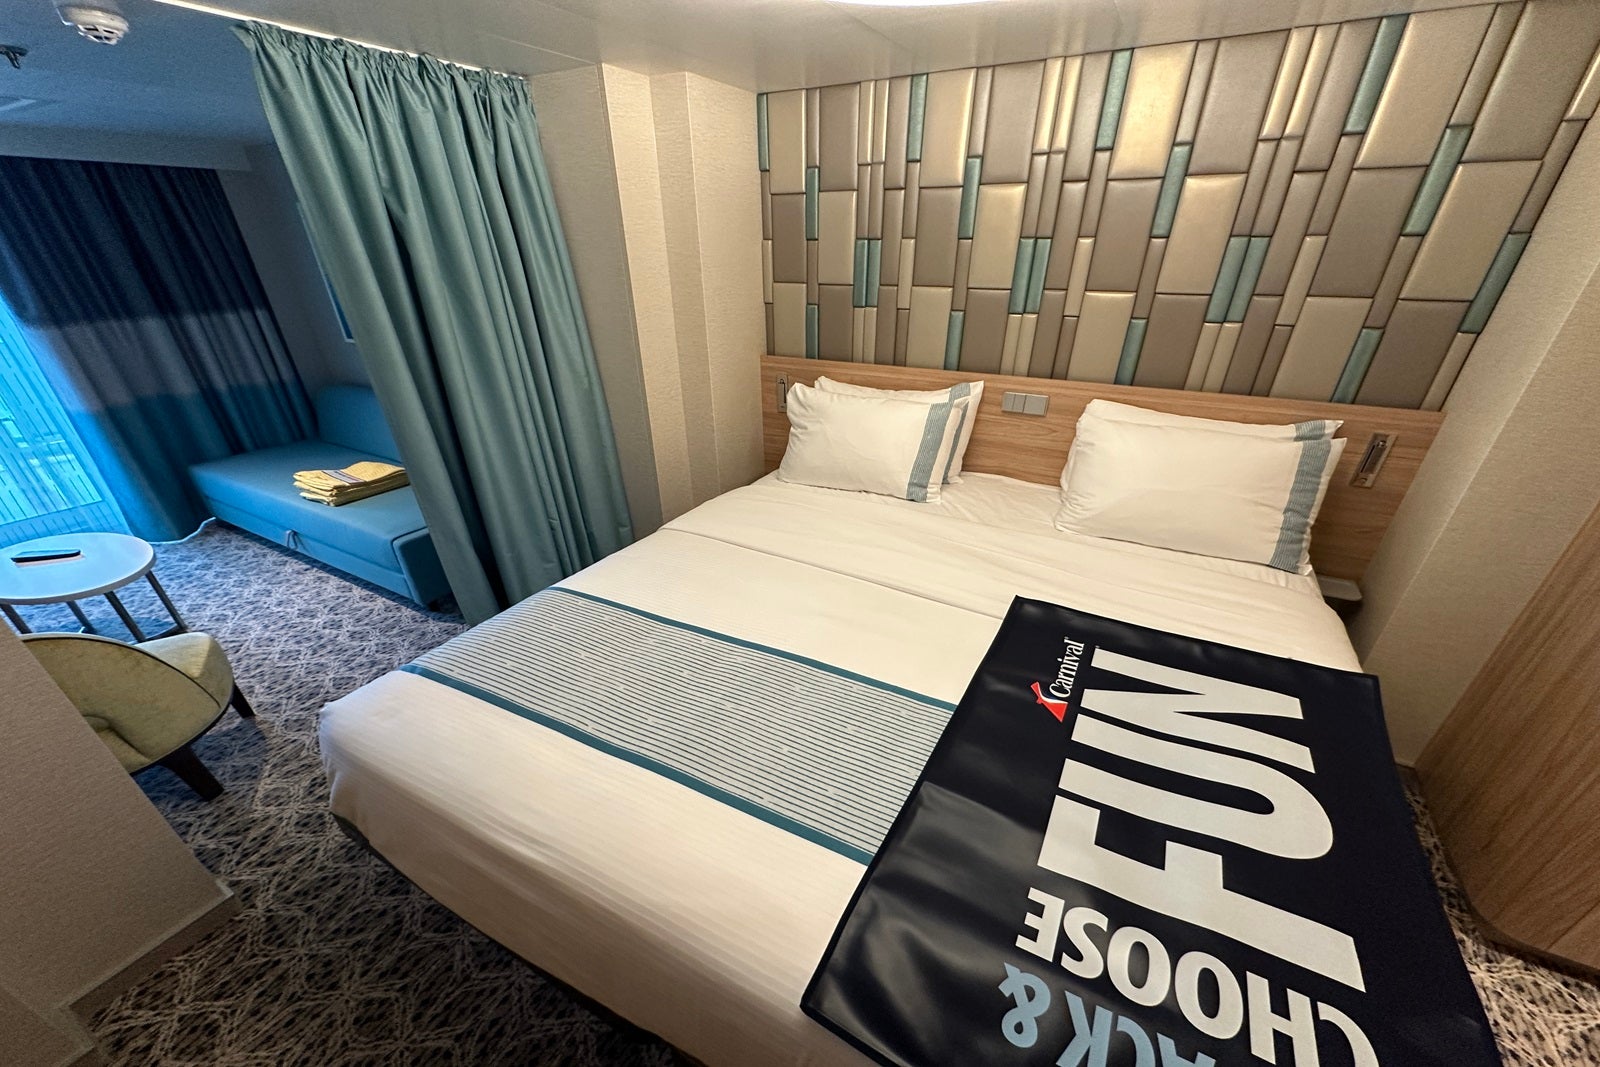 A cruise ship cabin with a bed and a luggage runner that says "Choose fun" with a checkered headboard behind it and a dividing curtain to the side